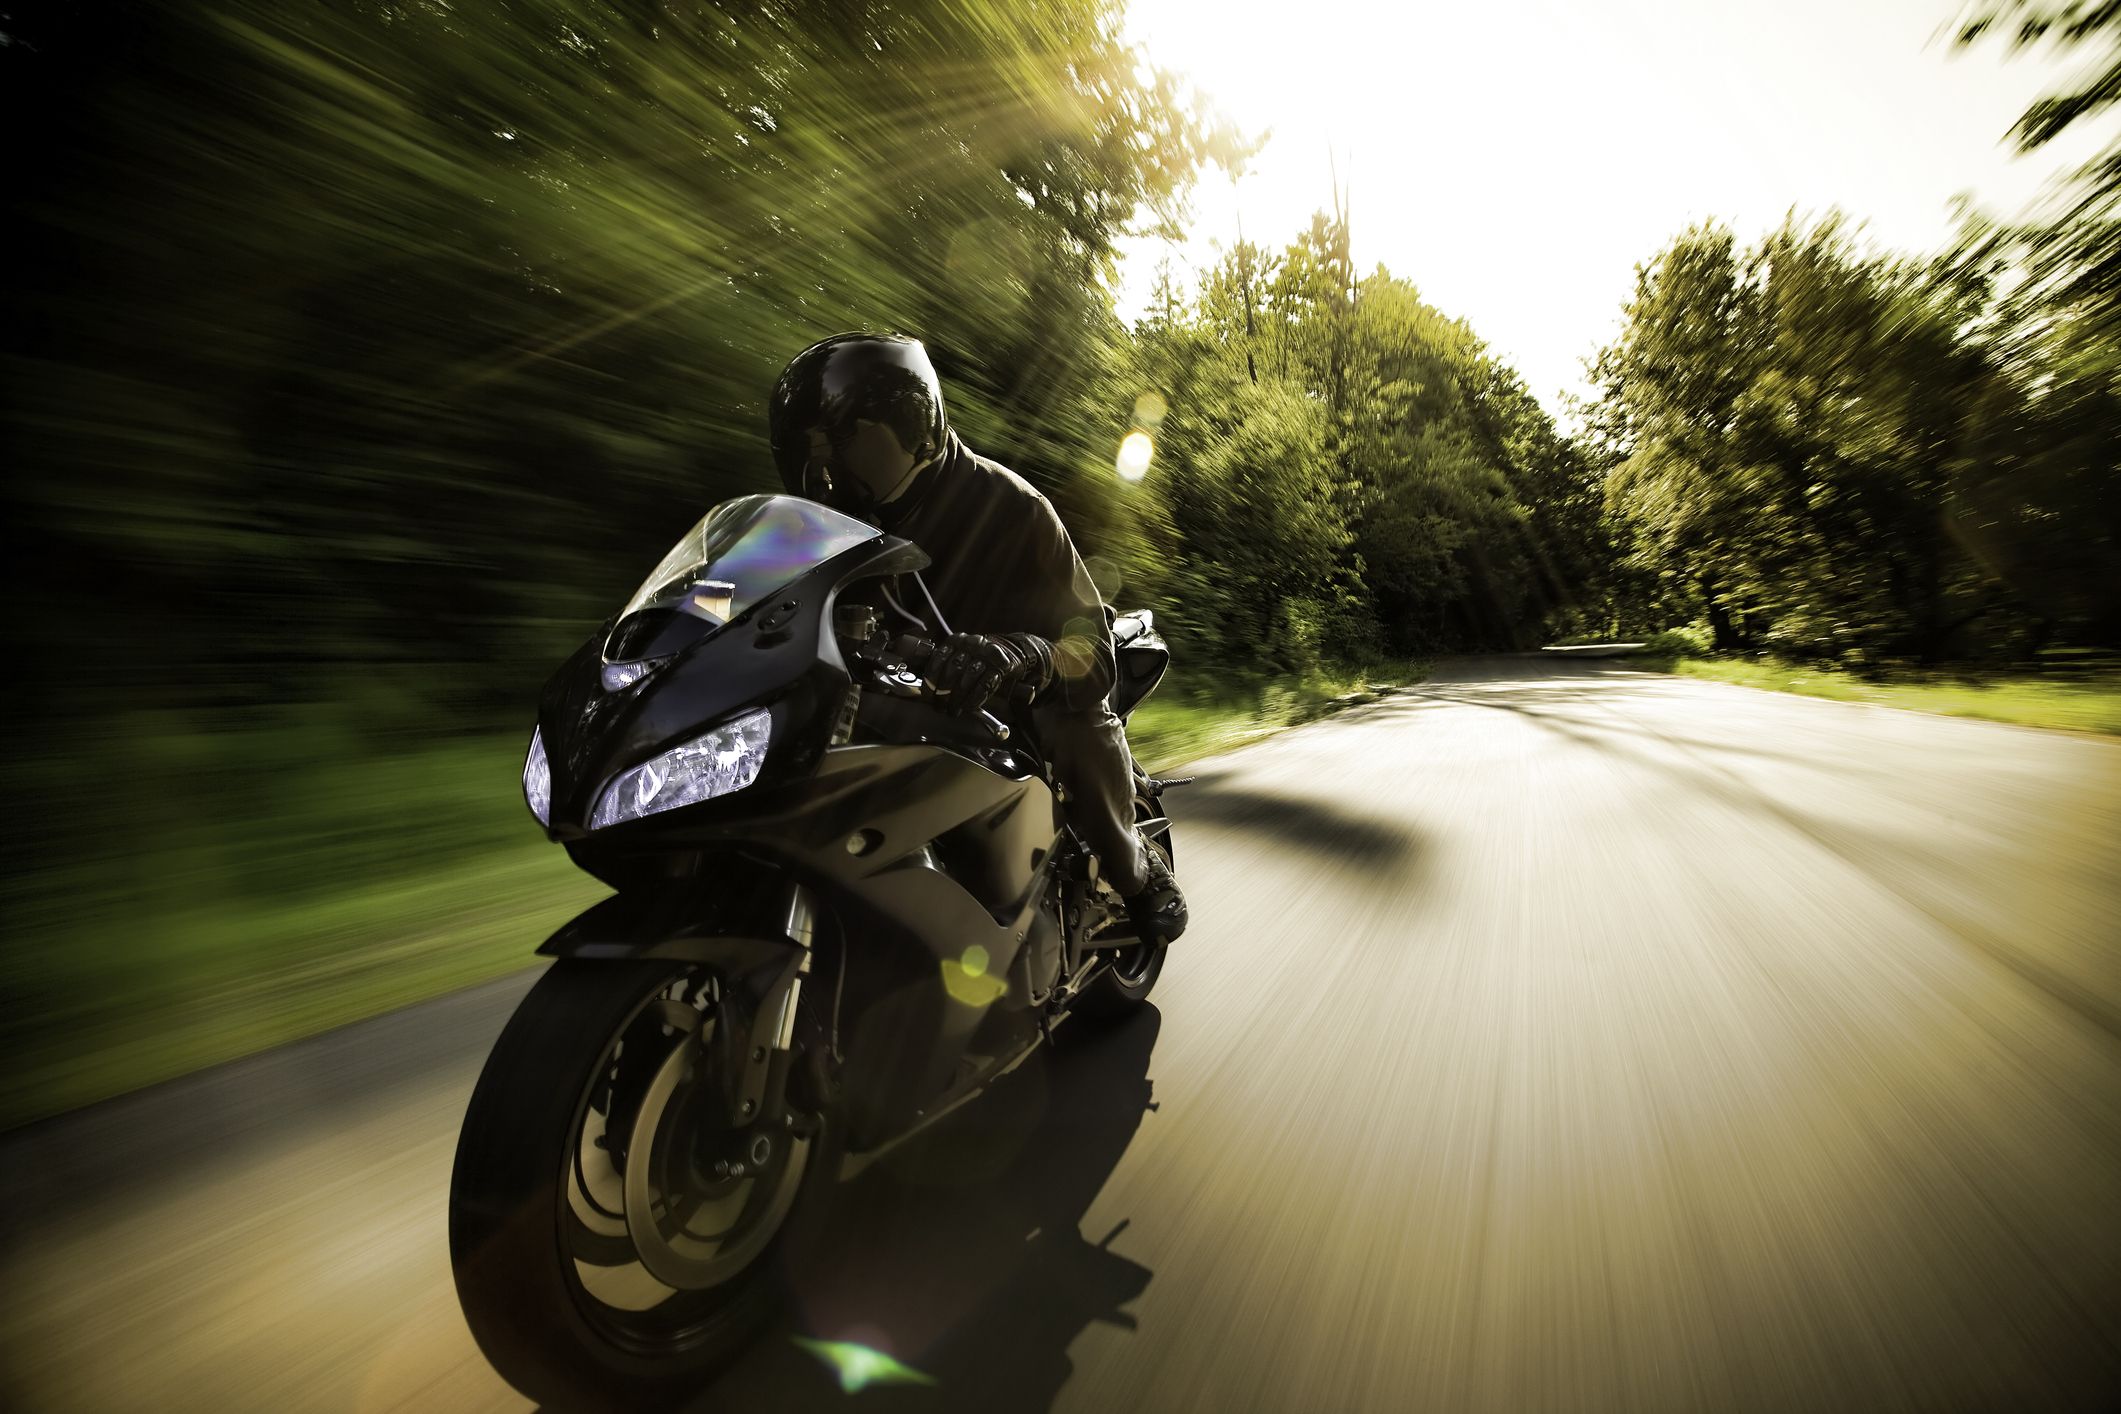 Top 10 Must-Have Motorcycle Accessories for Every Rider